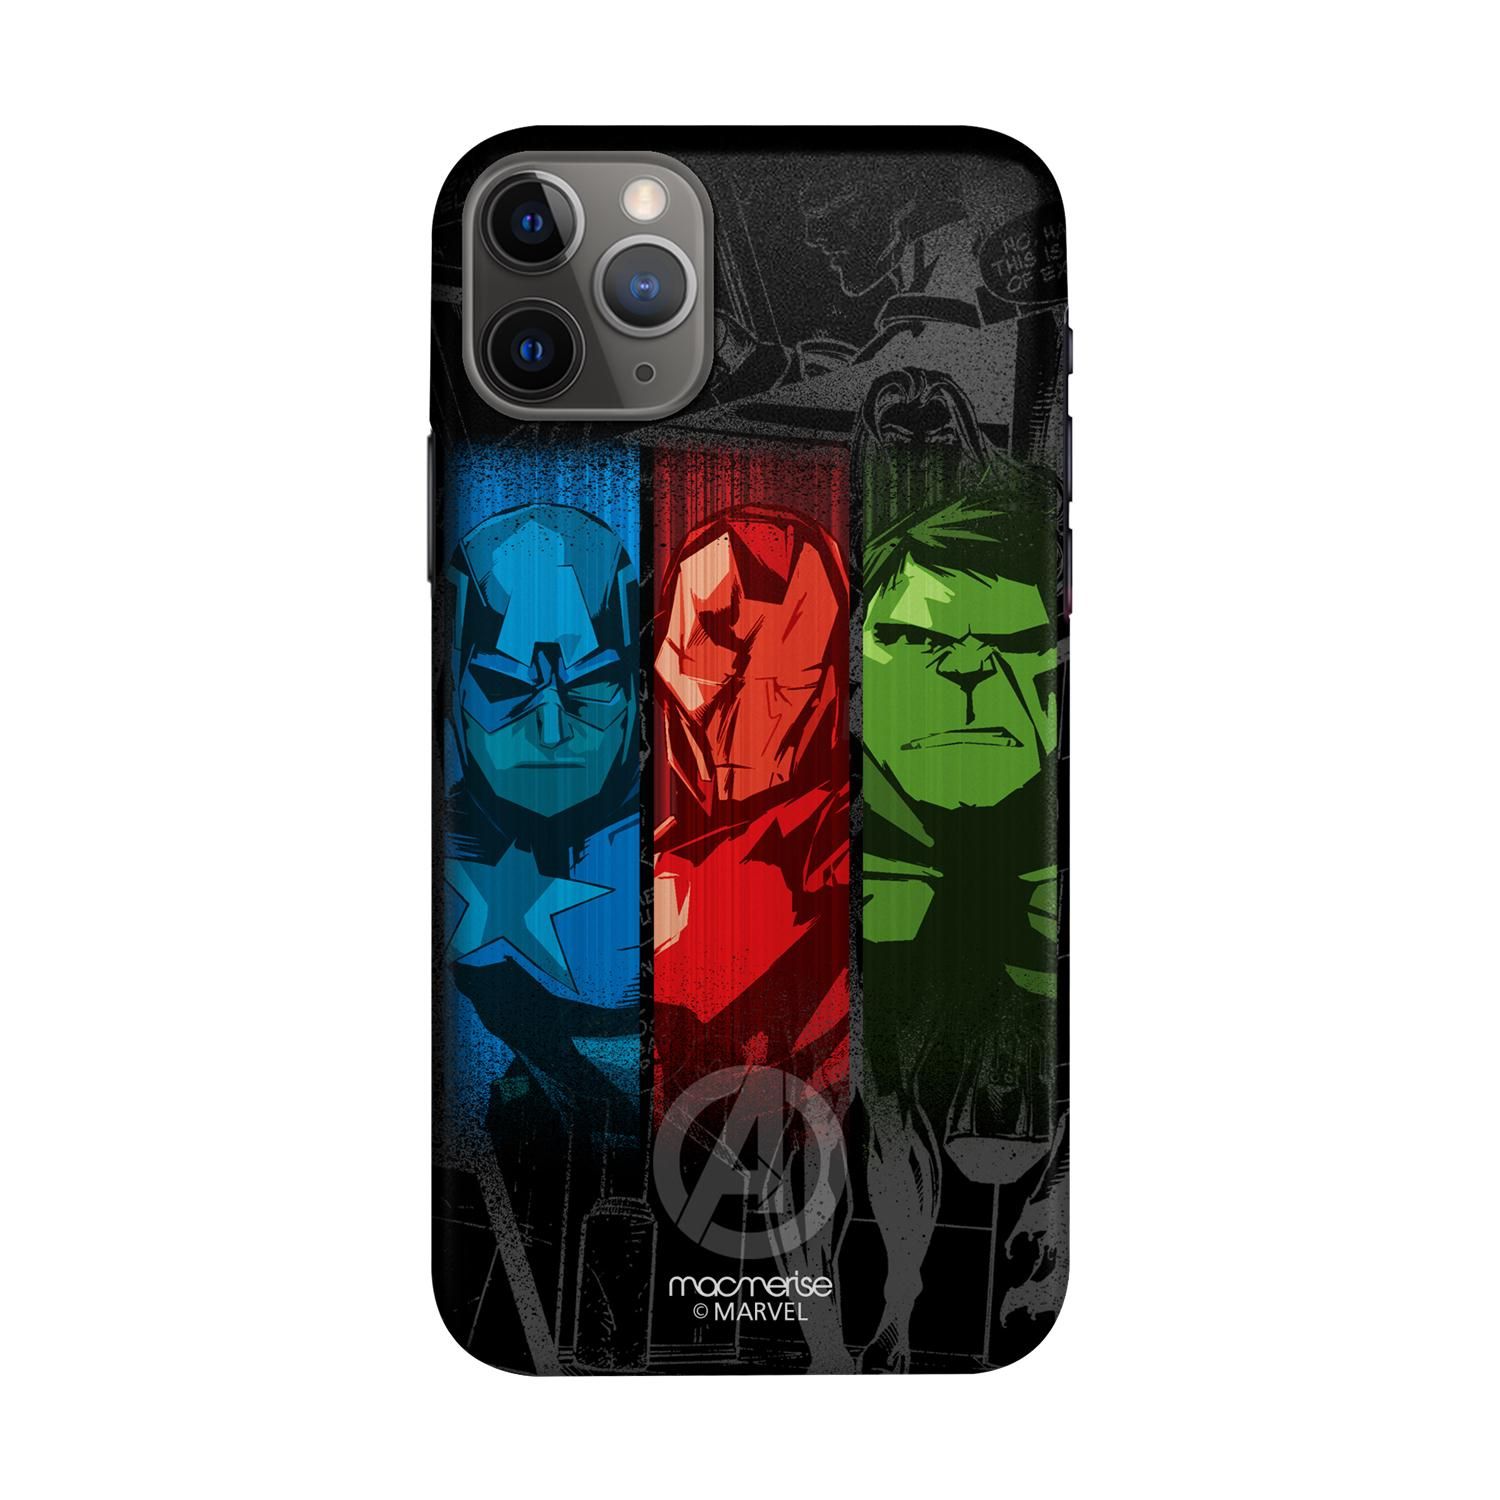 Buy Avengers Sketch - Sleek Phone Case for iPhone 11 Pro Max Online